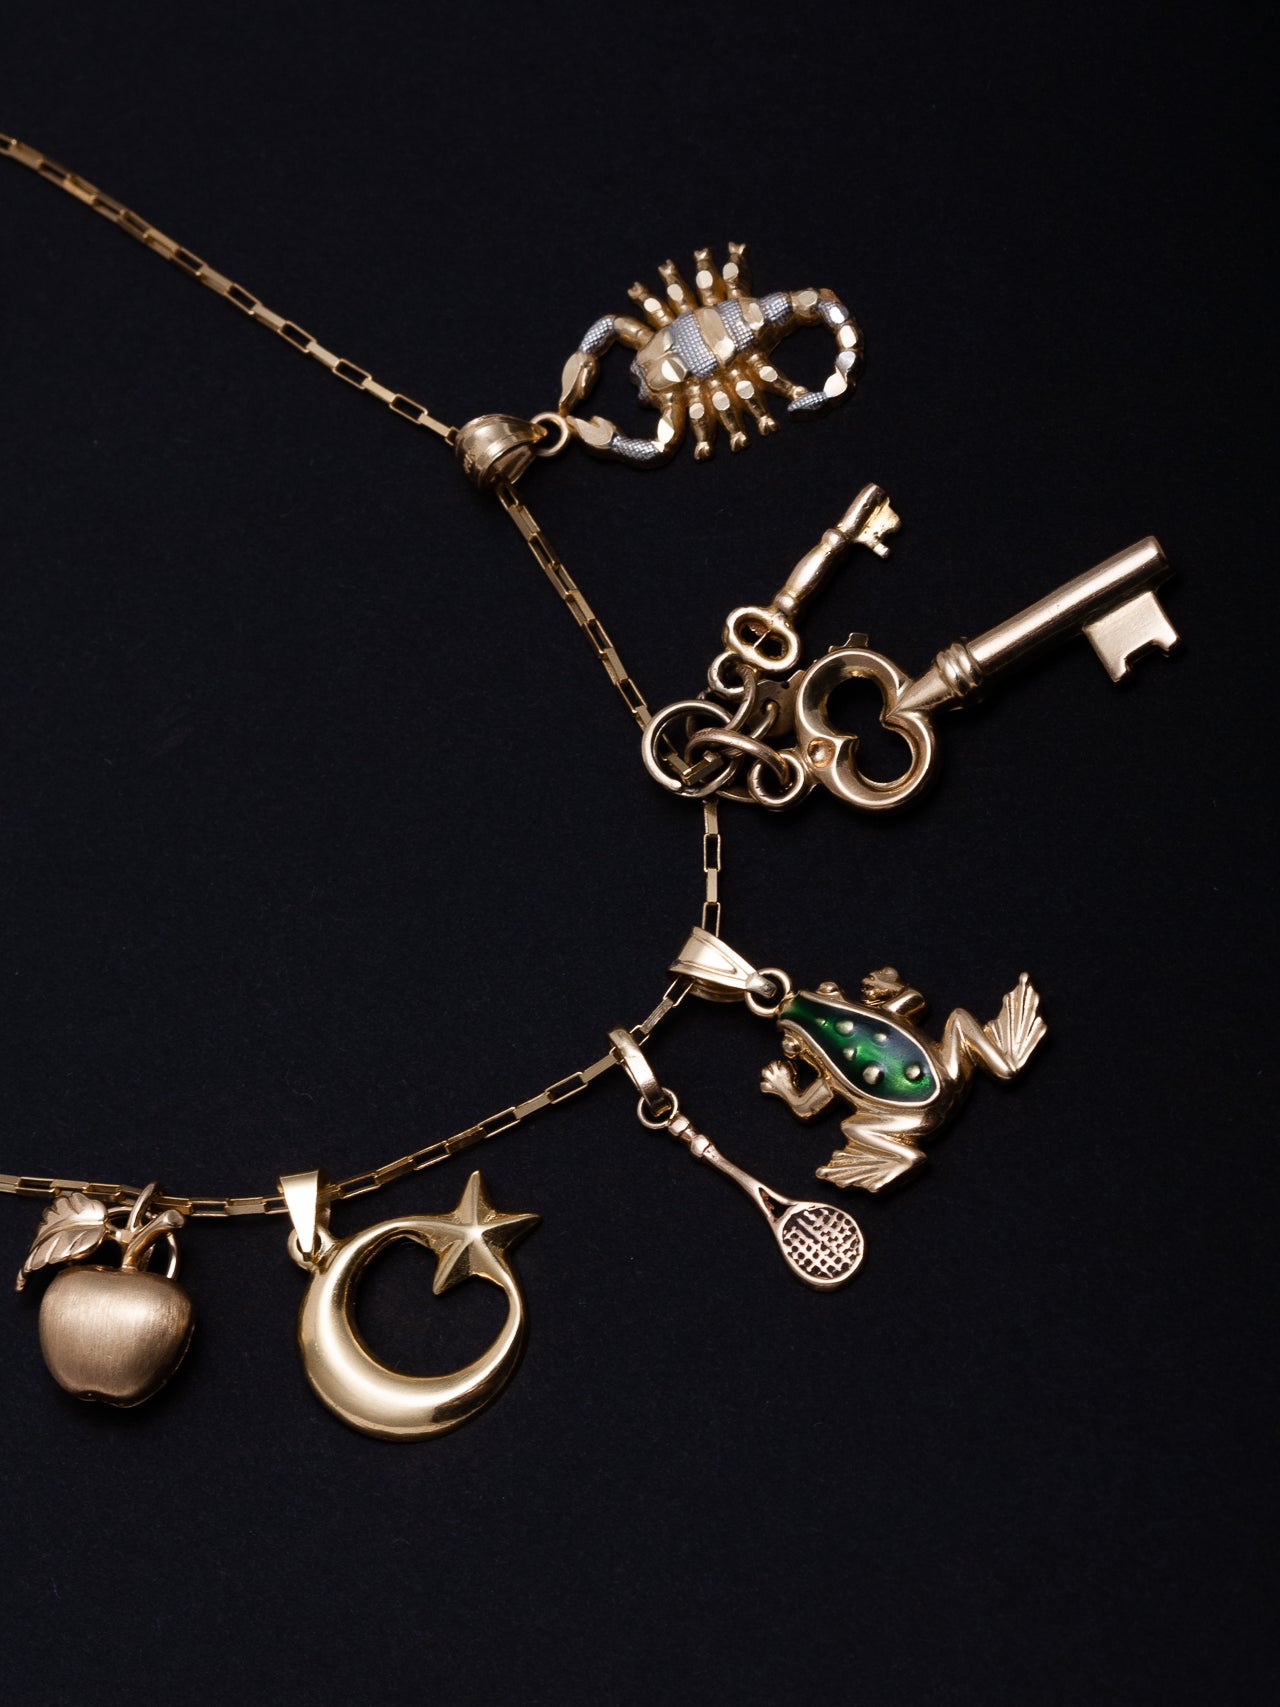 Lucky Apple Charm pictured on XL Lightweight Havana Chain with other Vintage Charms. Black Background.